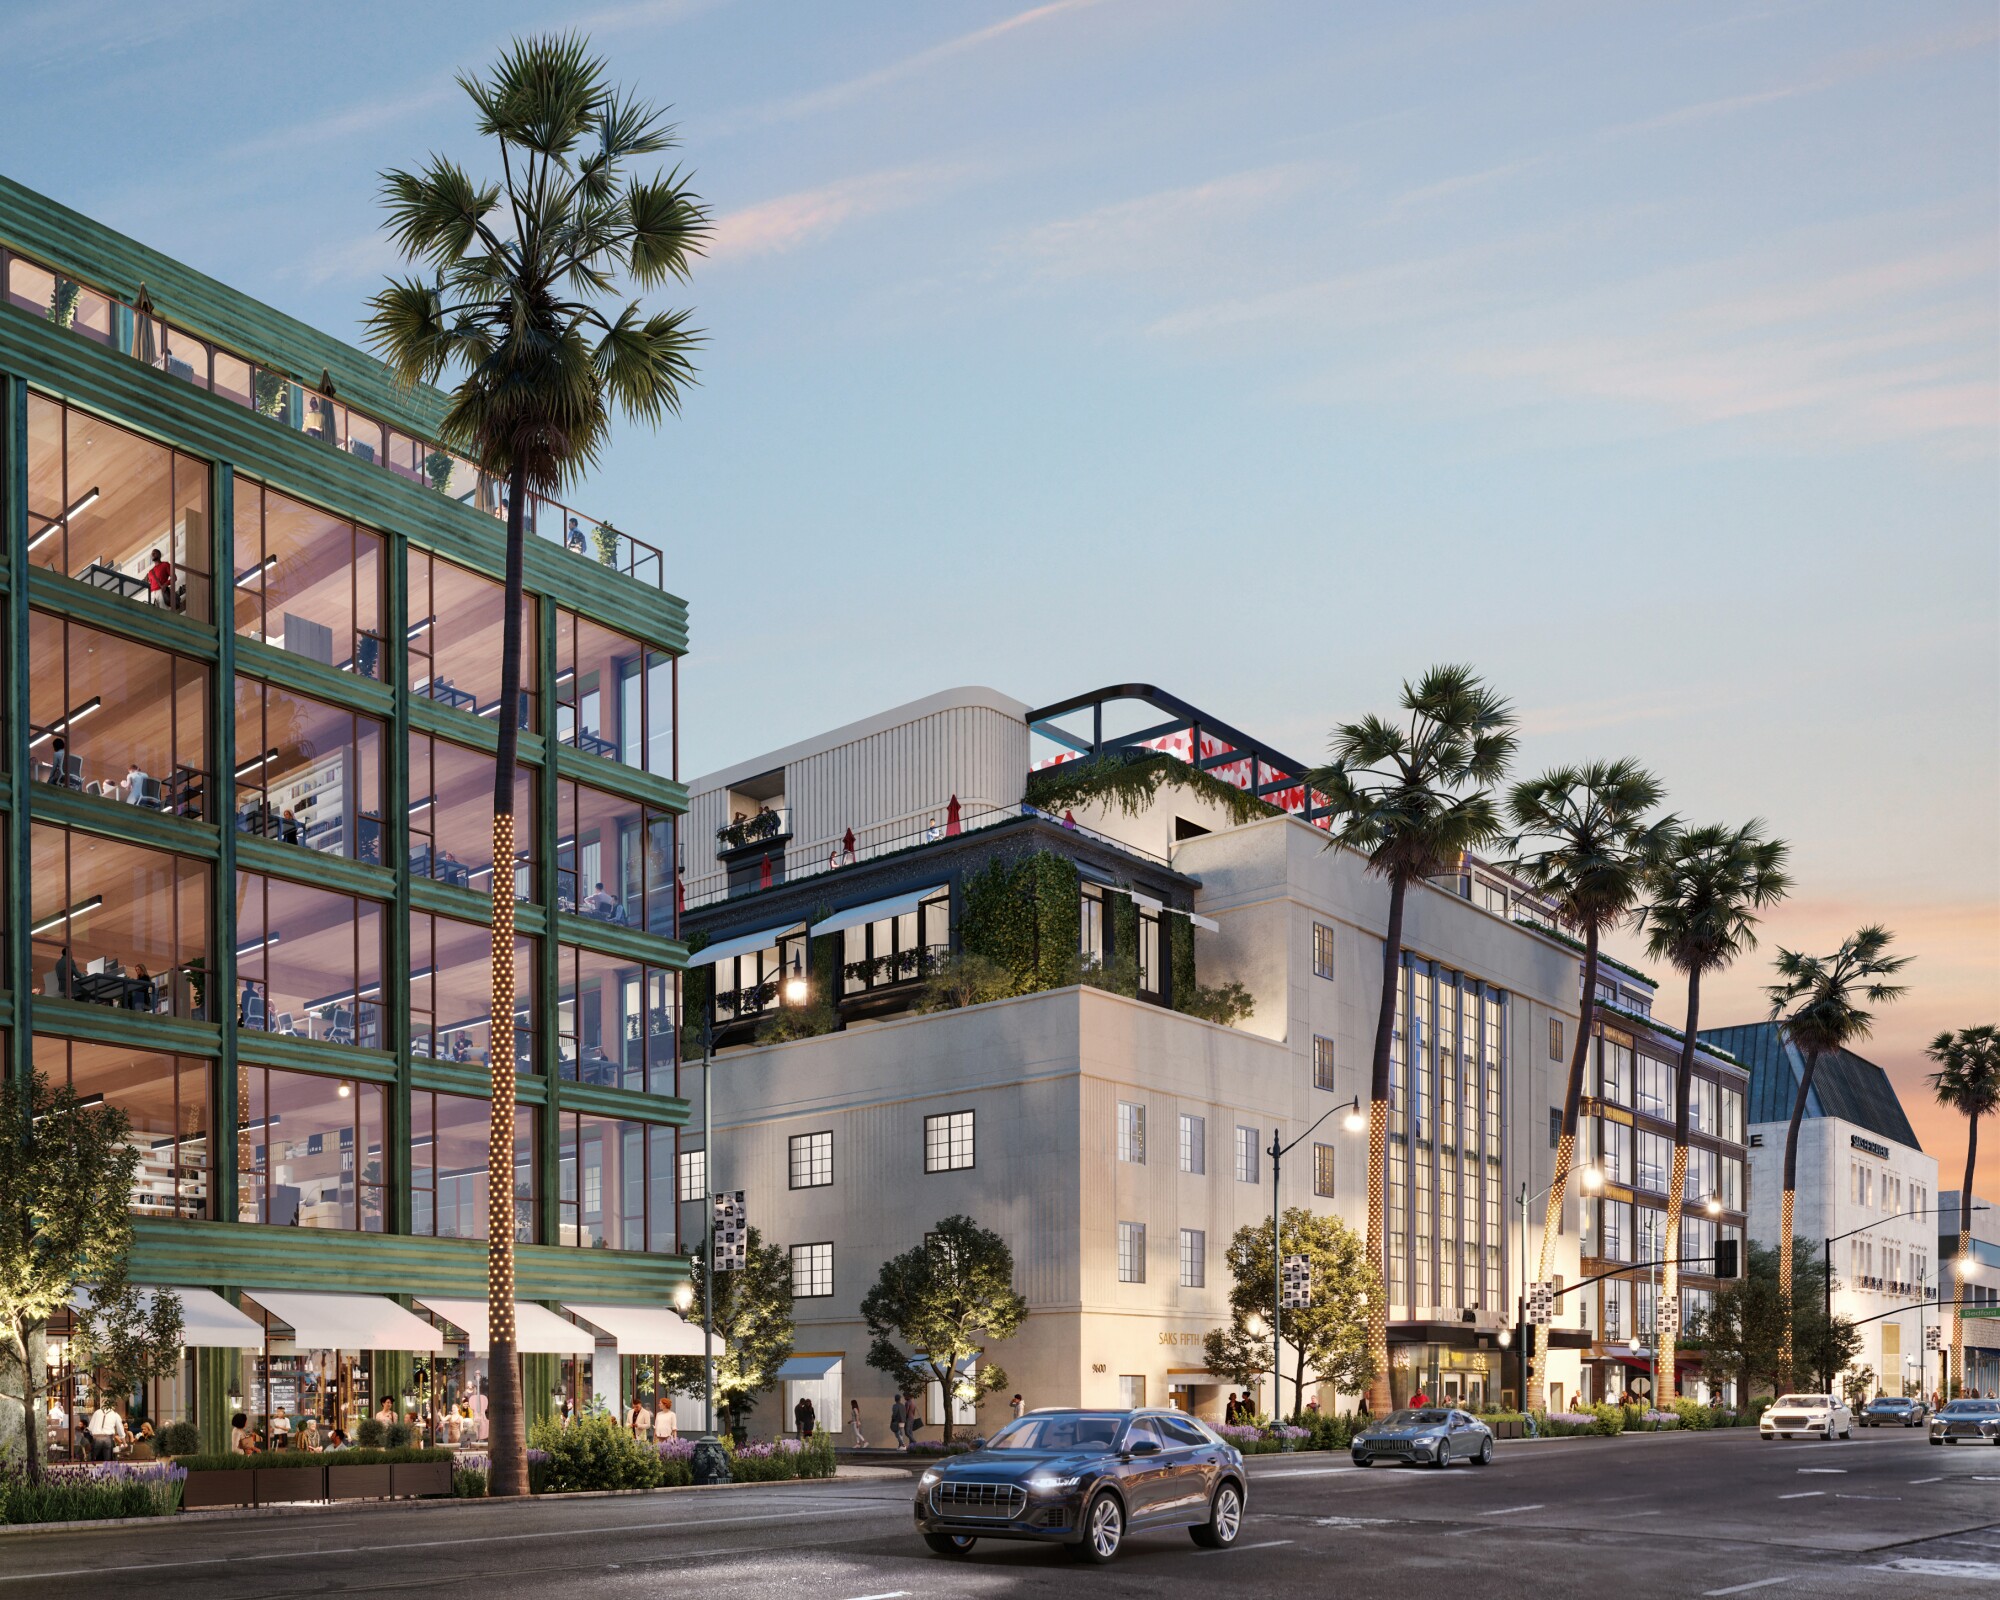 A rendering of a planned mixed-use development at the Saks Fifth Avenue building in Beverly Hills